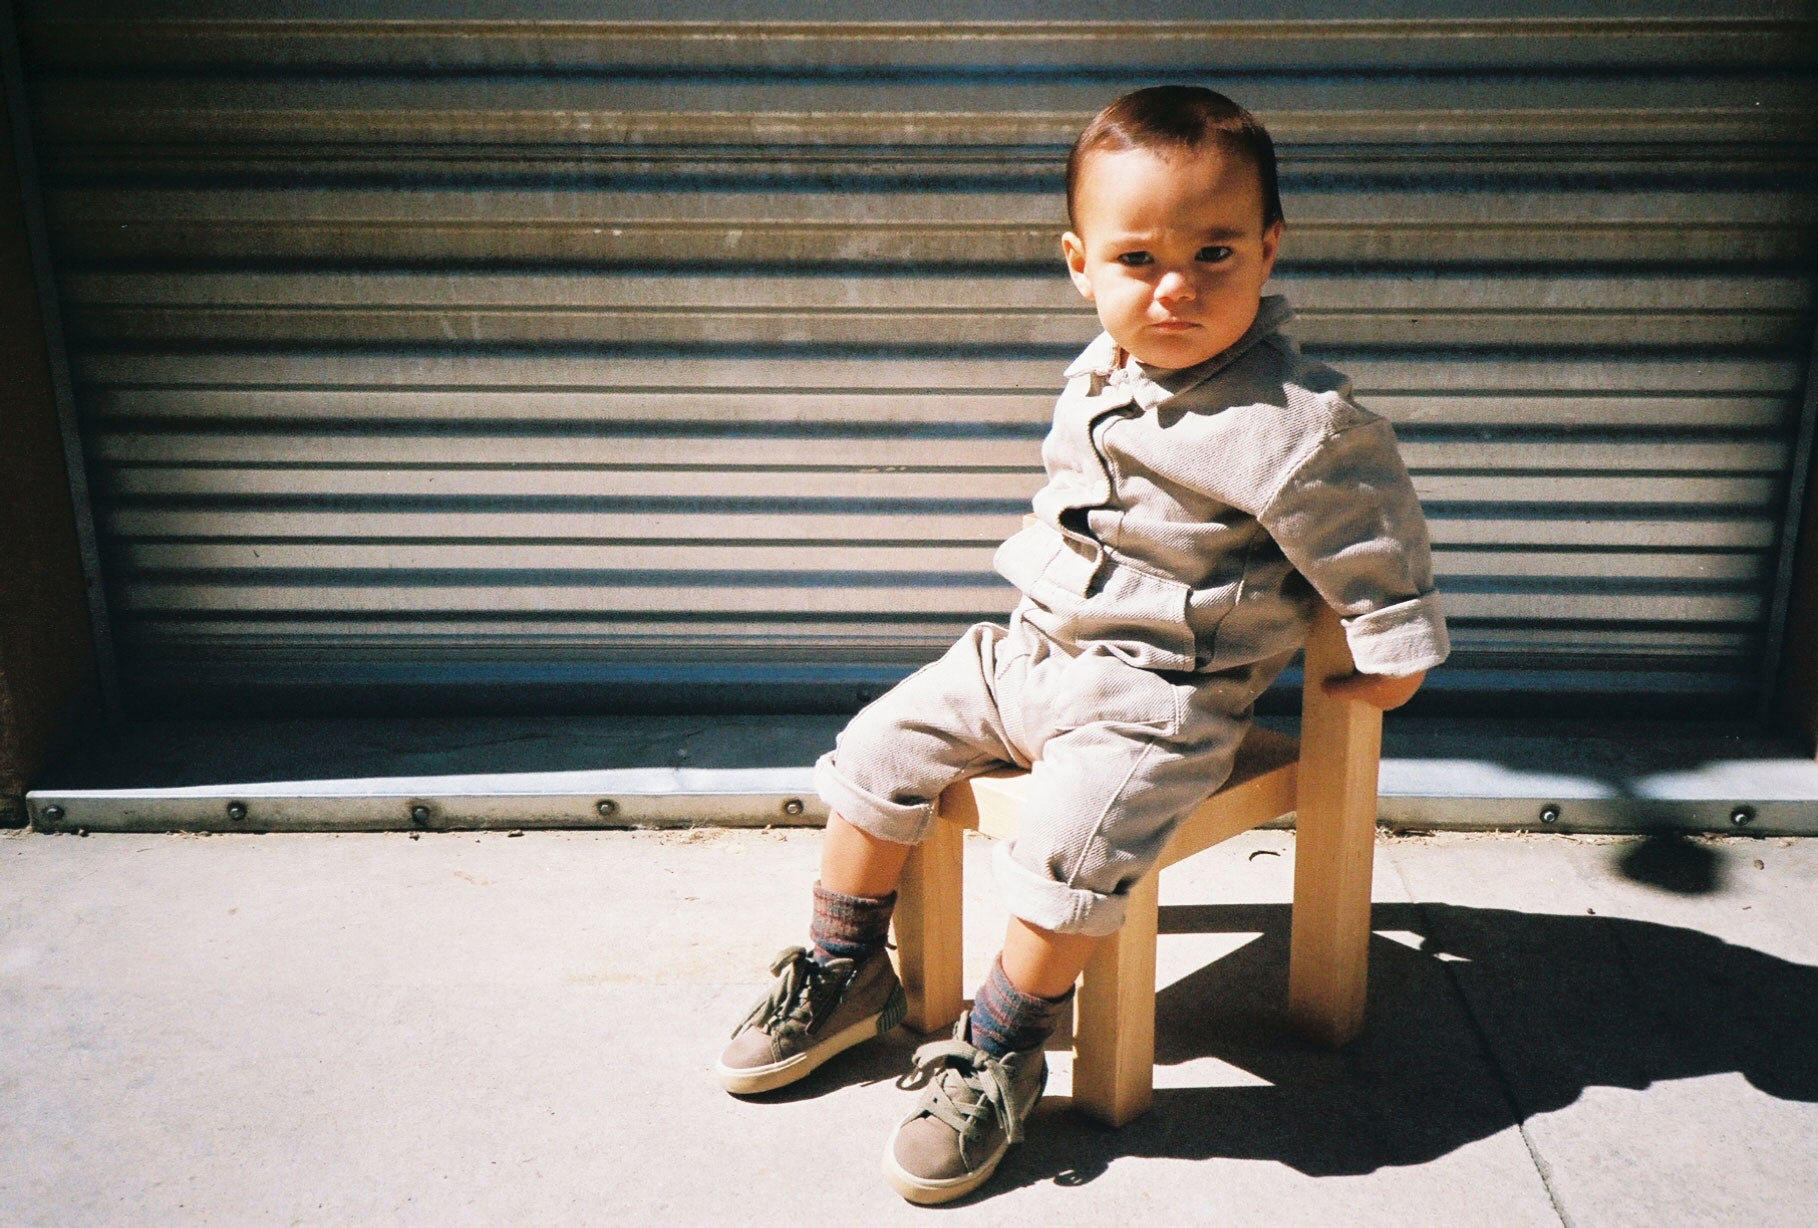 Child sitting on the Natural finish Child's Anything Chair shot outside